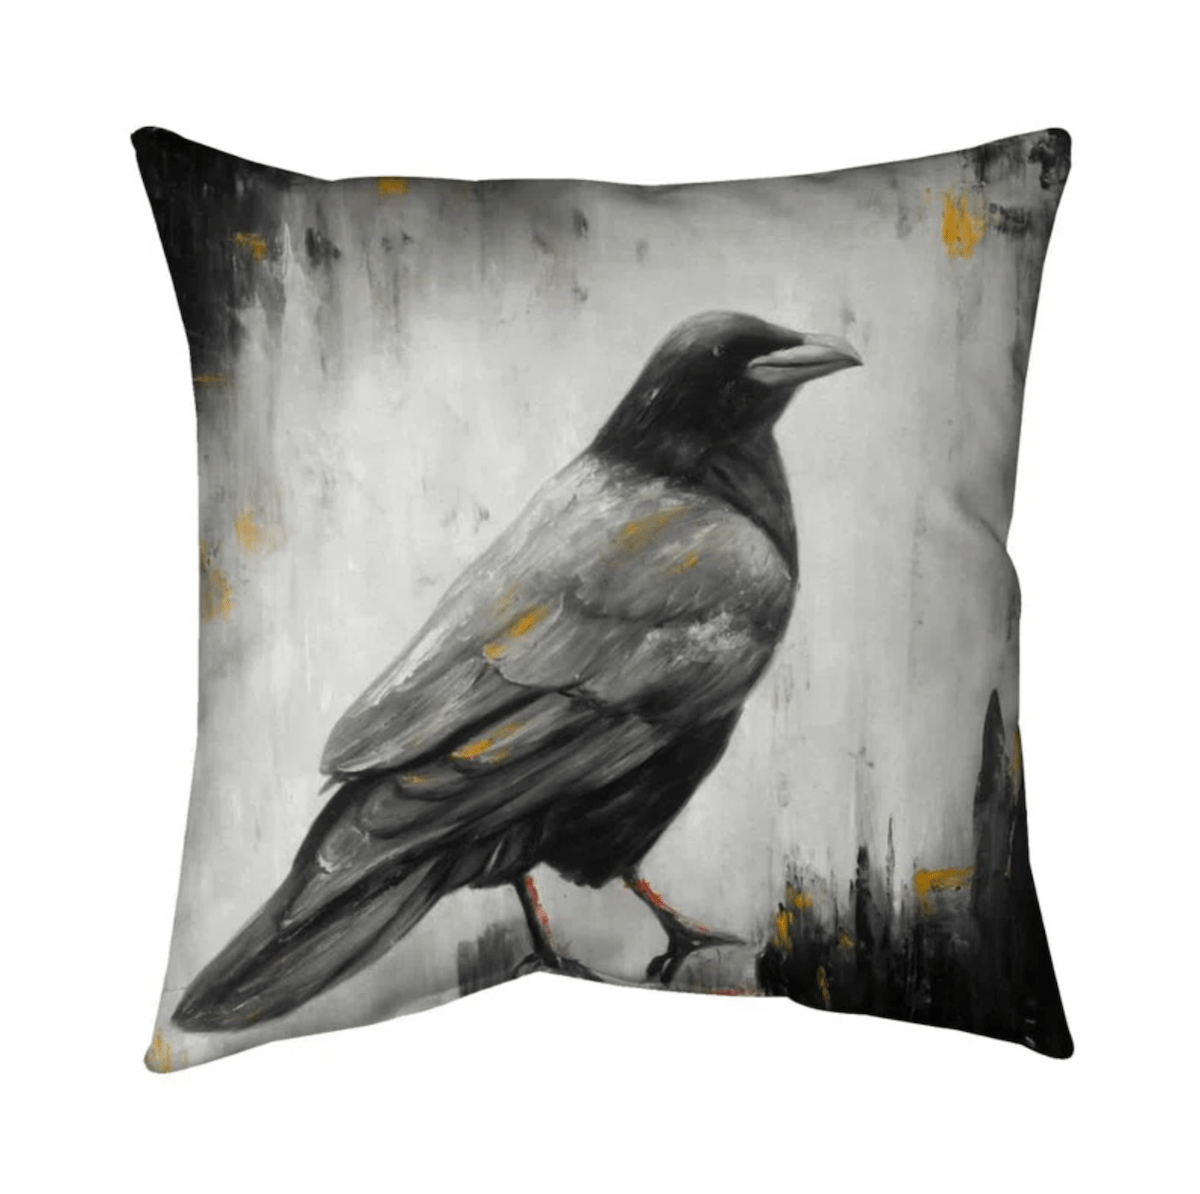 11 Cute Crow Gifts for the Corvid Lover - Birds and Blooms